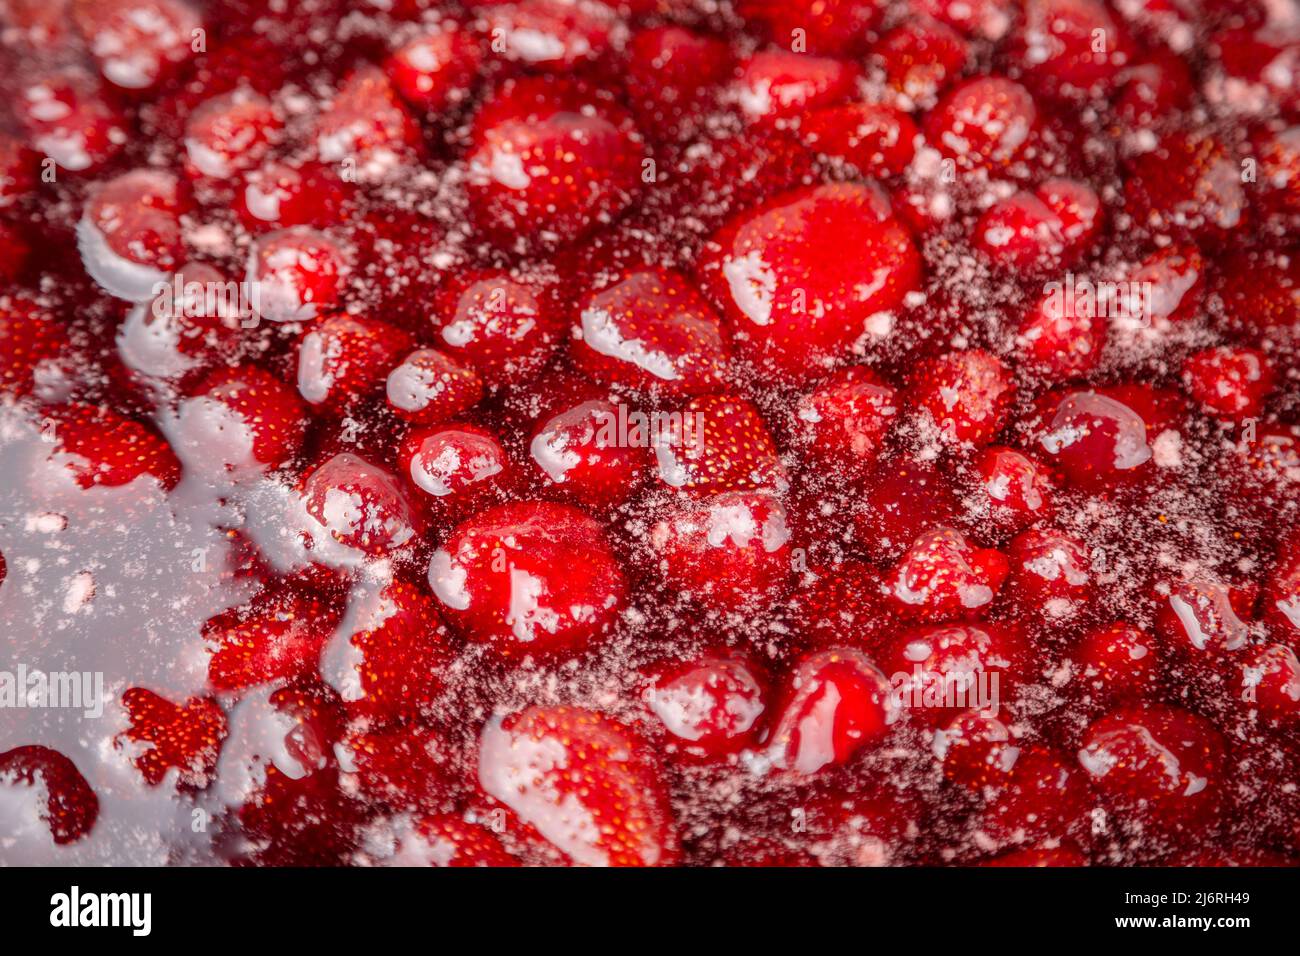 Strawberry jam. Homemade Strawberry jam in making progress boiling. Strawberry jam is boiling, detailed shooting. Strawberry jam, top view. Process of cooking, boiling berries for canning. Stock Photo